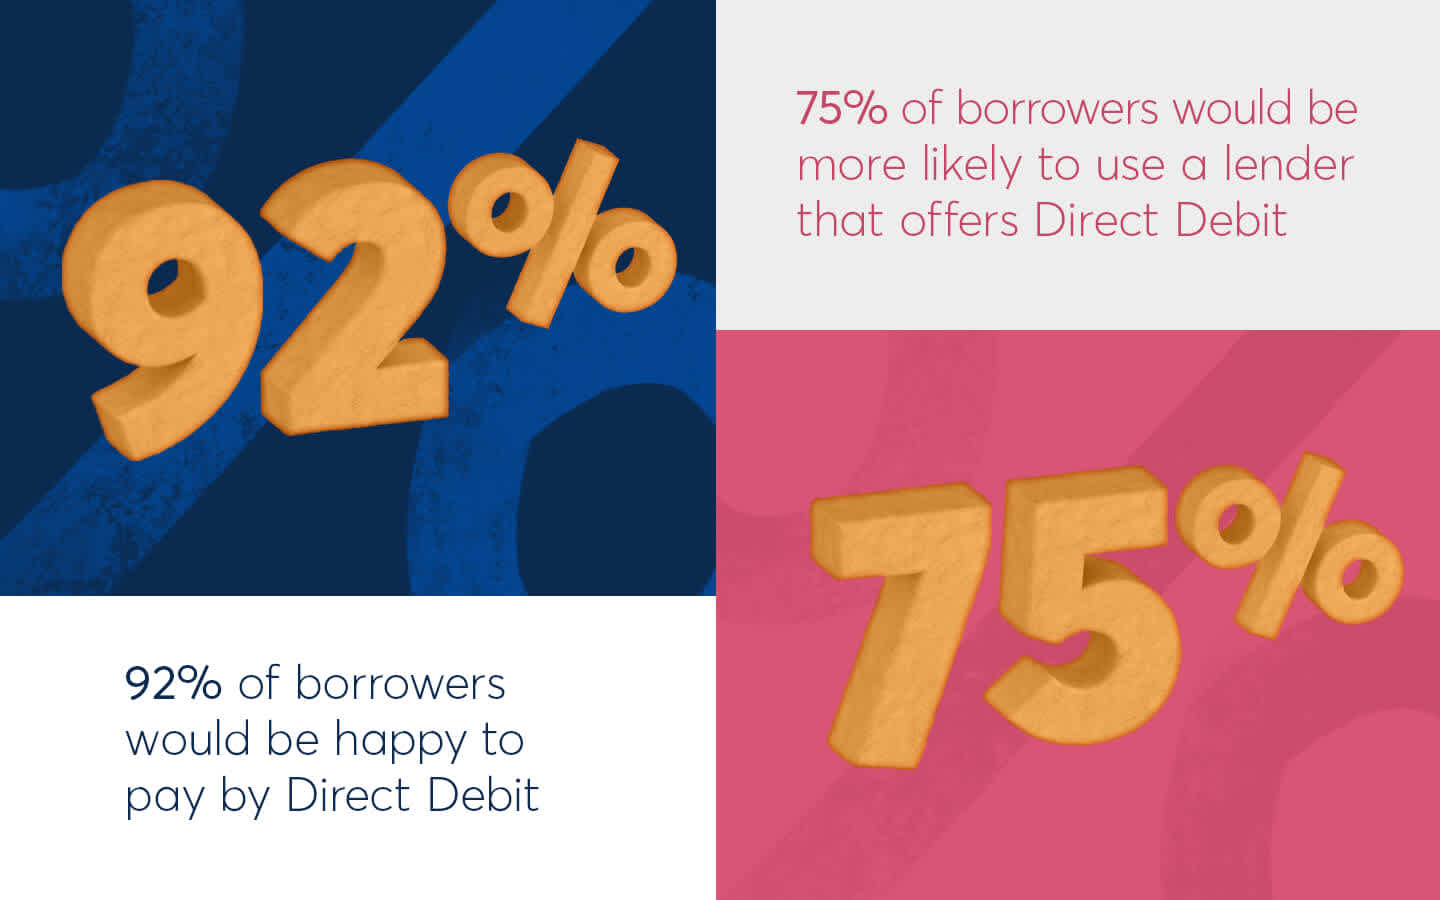 guides > images > borrowers-survey > loan-borrower-6